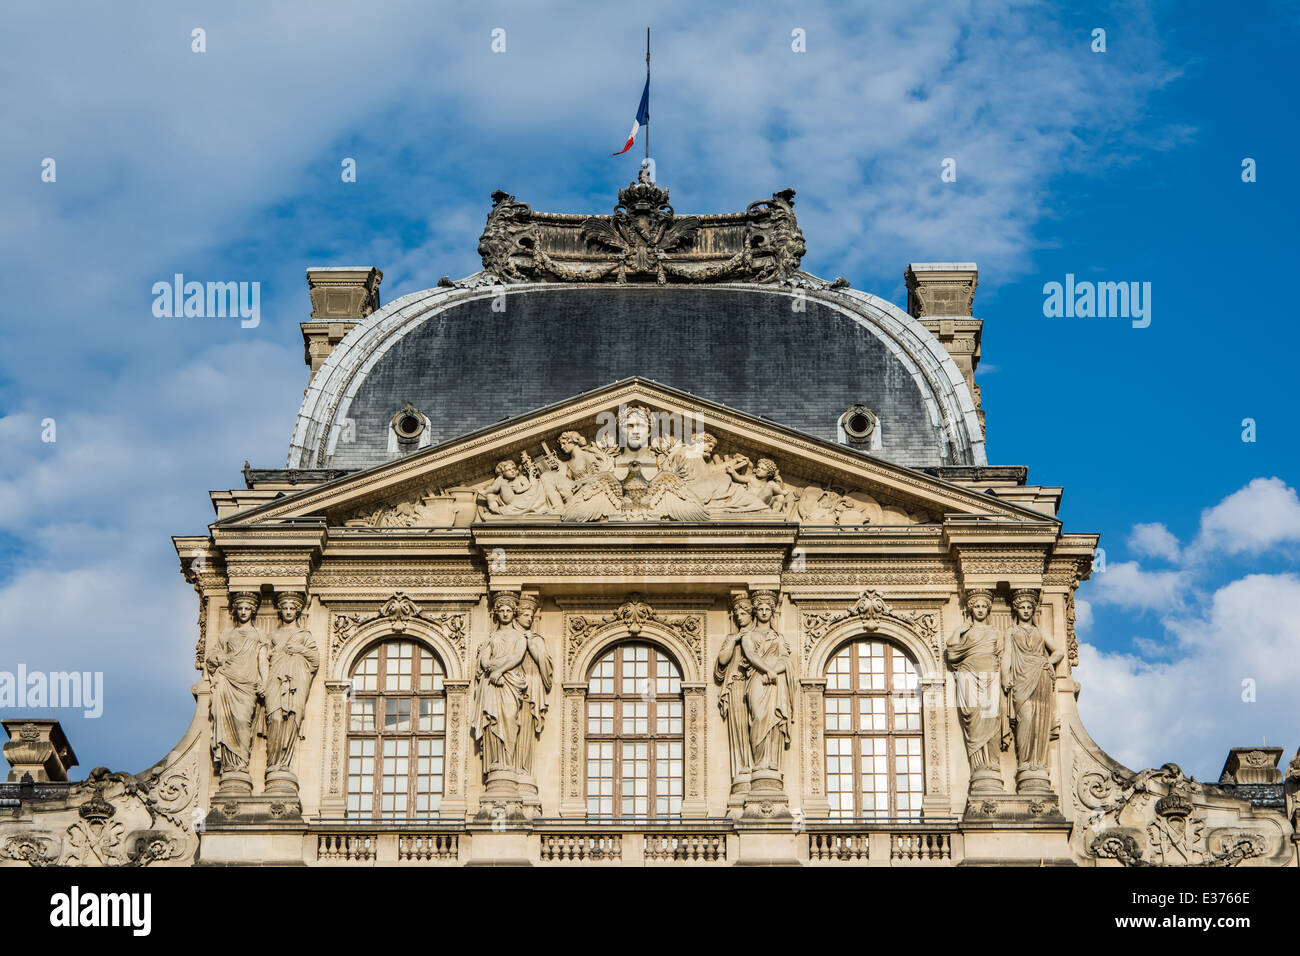 Architectural masterpiece of the French Renaissance, constructed of cut stone. Stock Photo